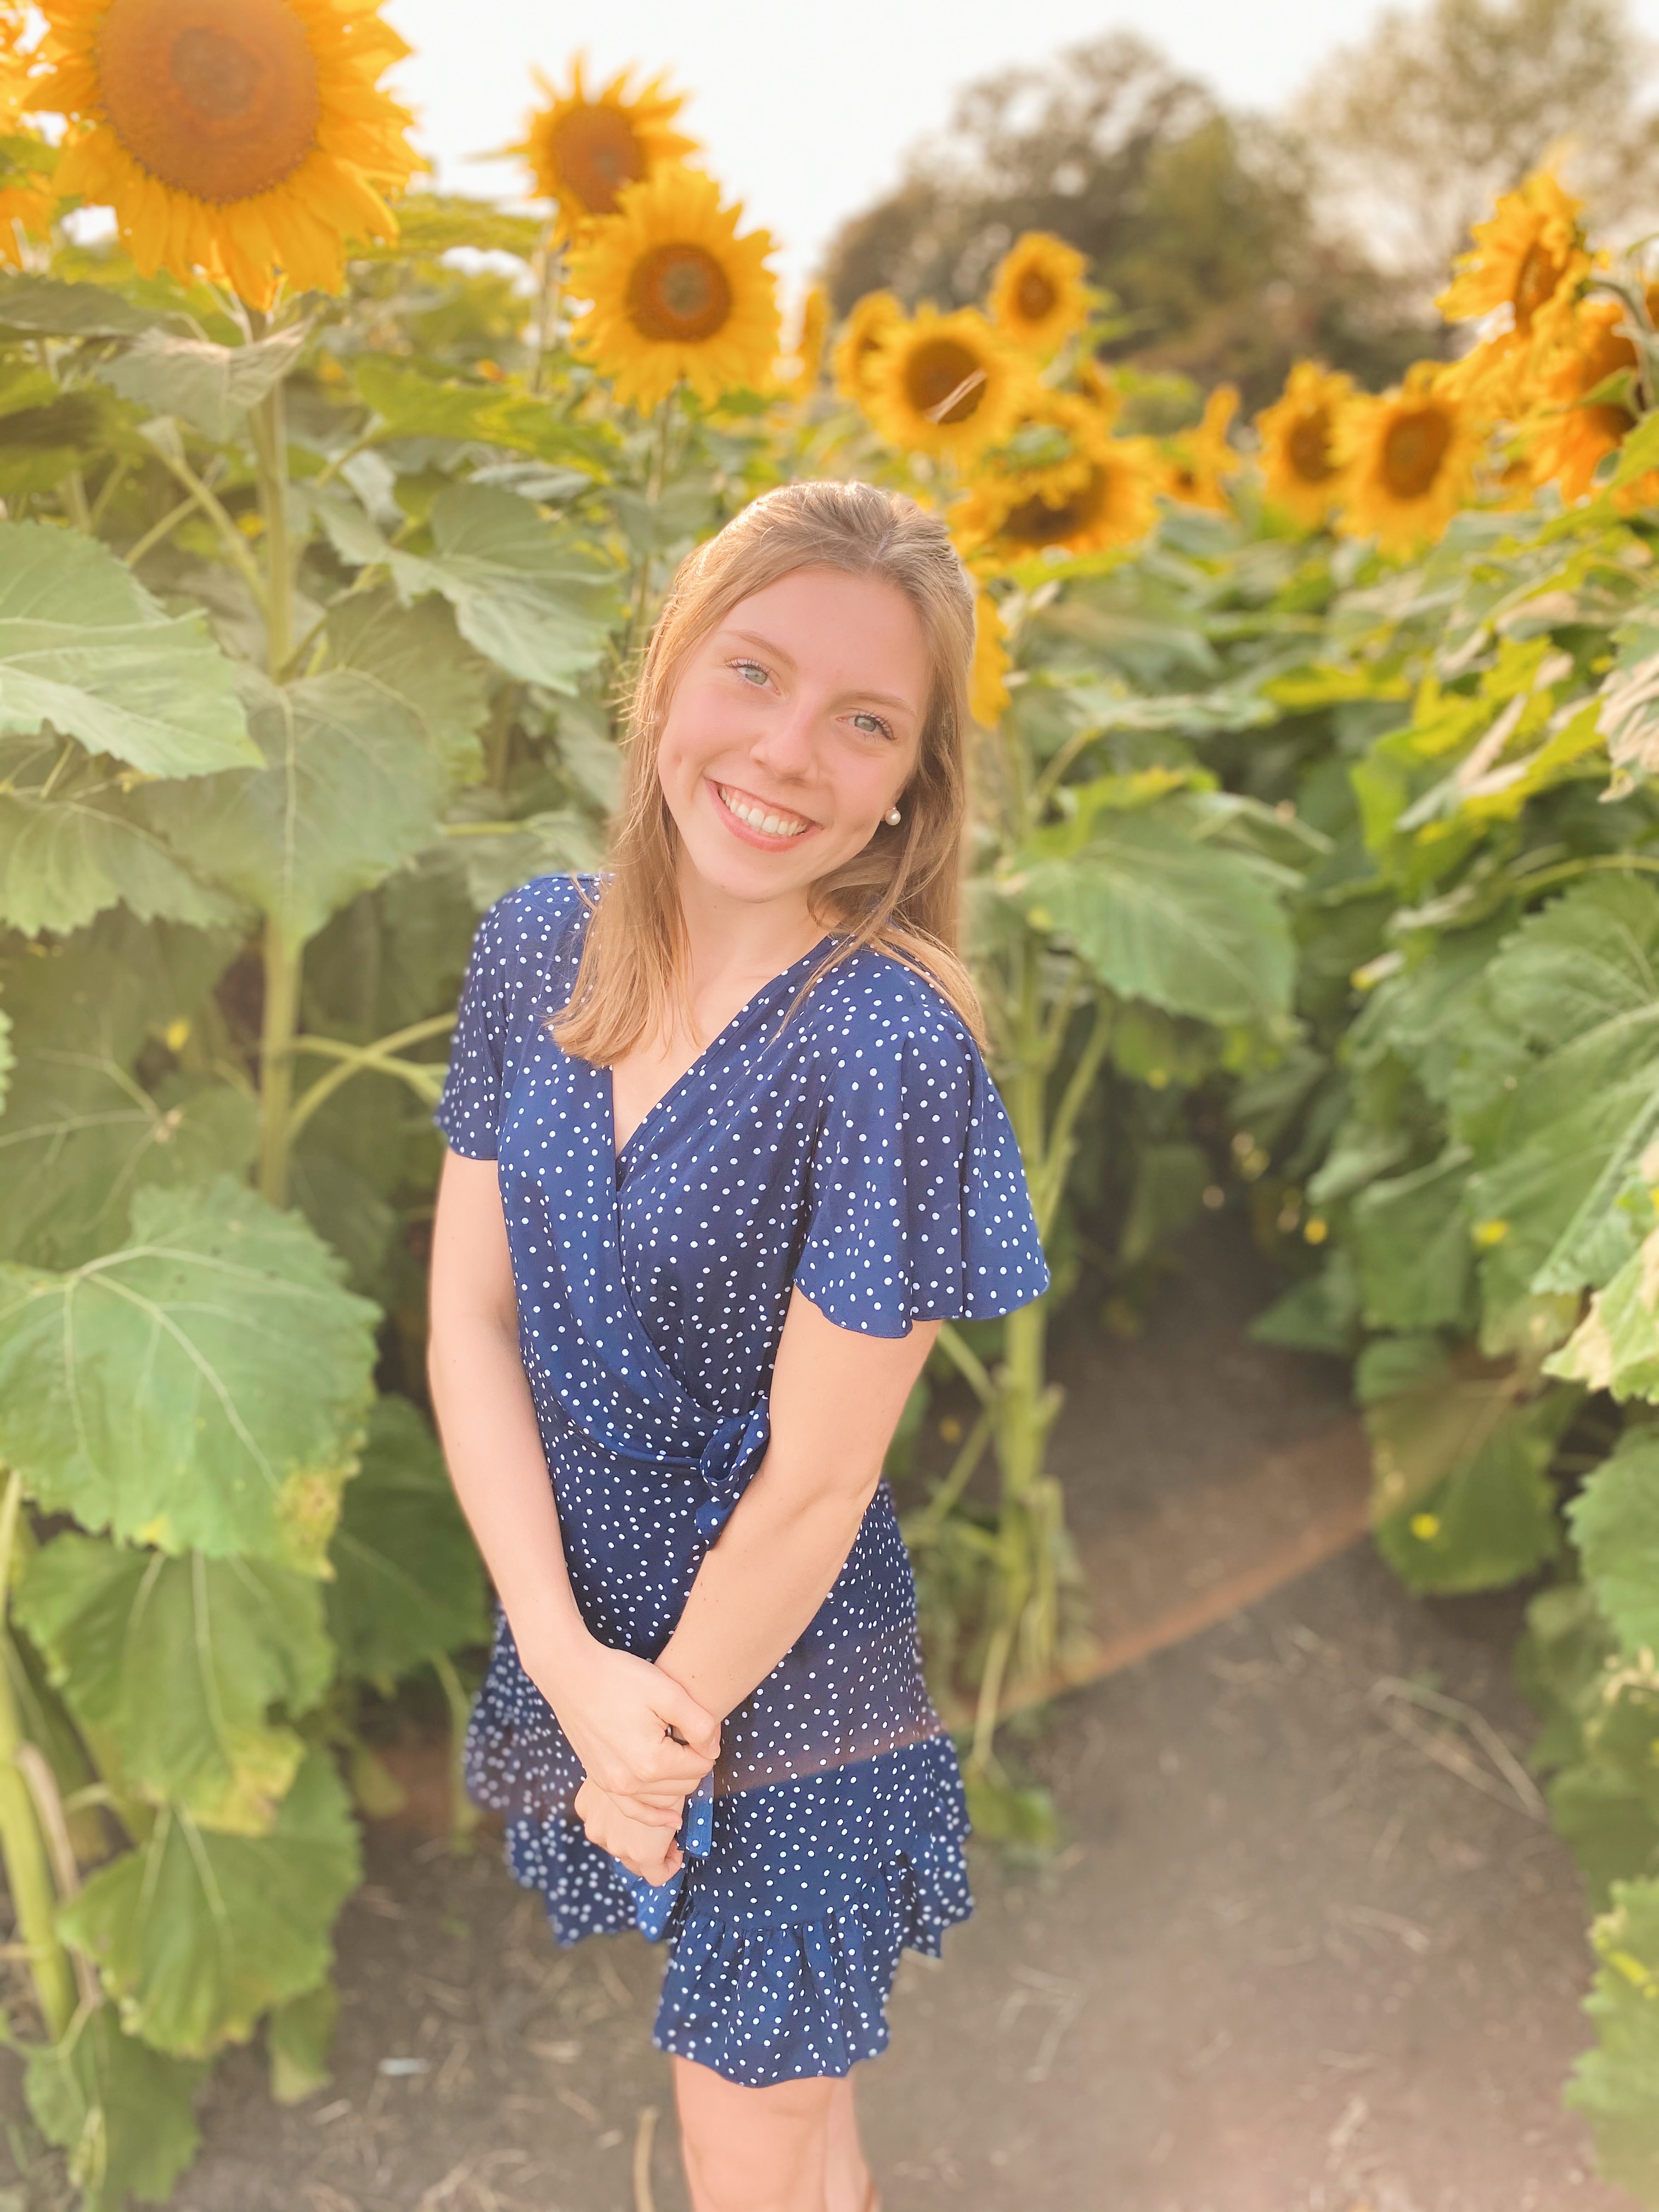 A picture of a smiling girl with brown hair in front of a sunflower field.